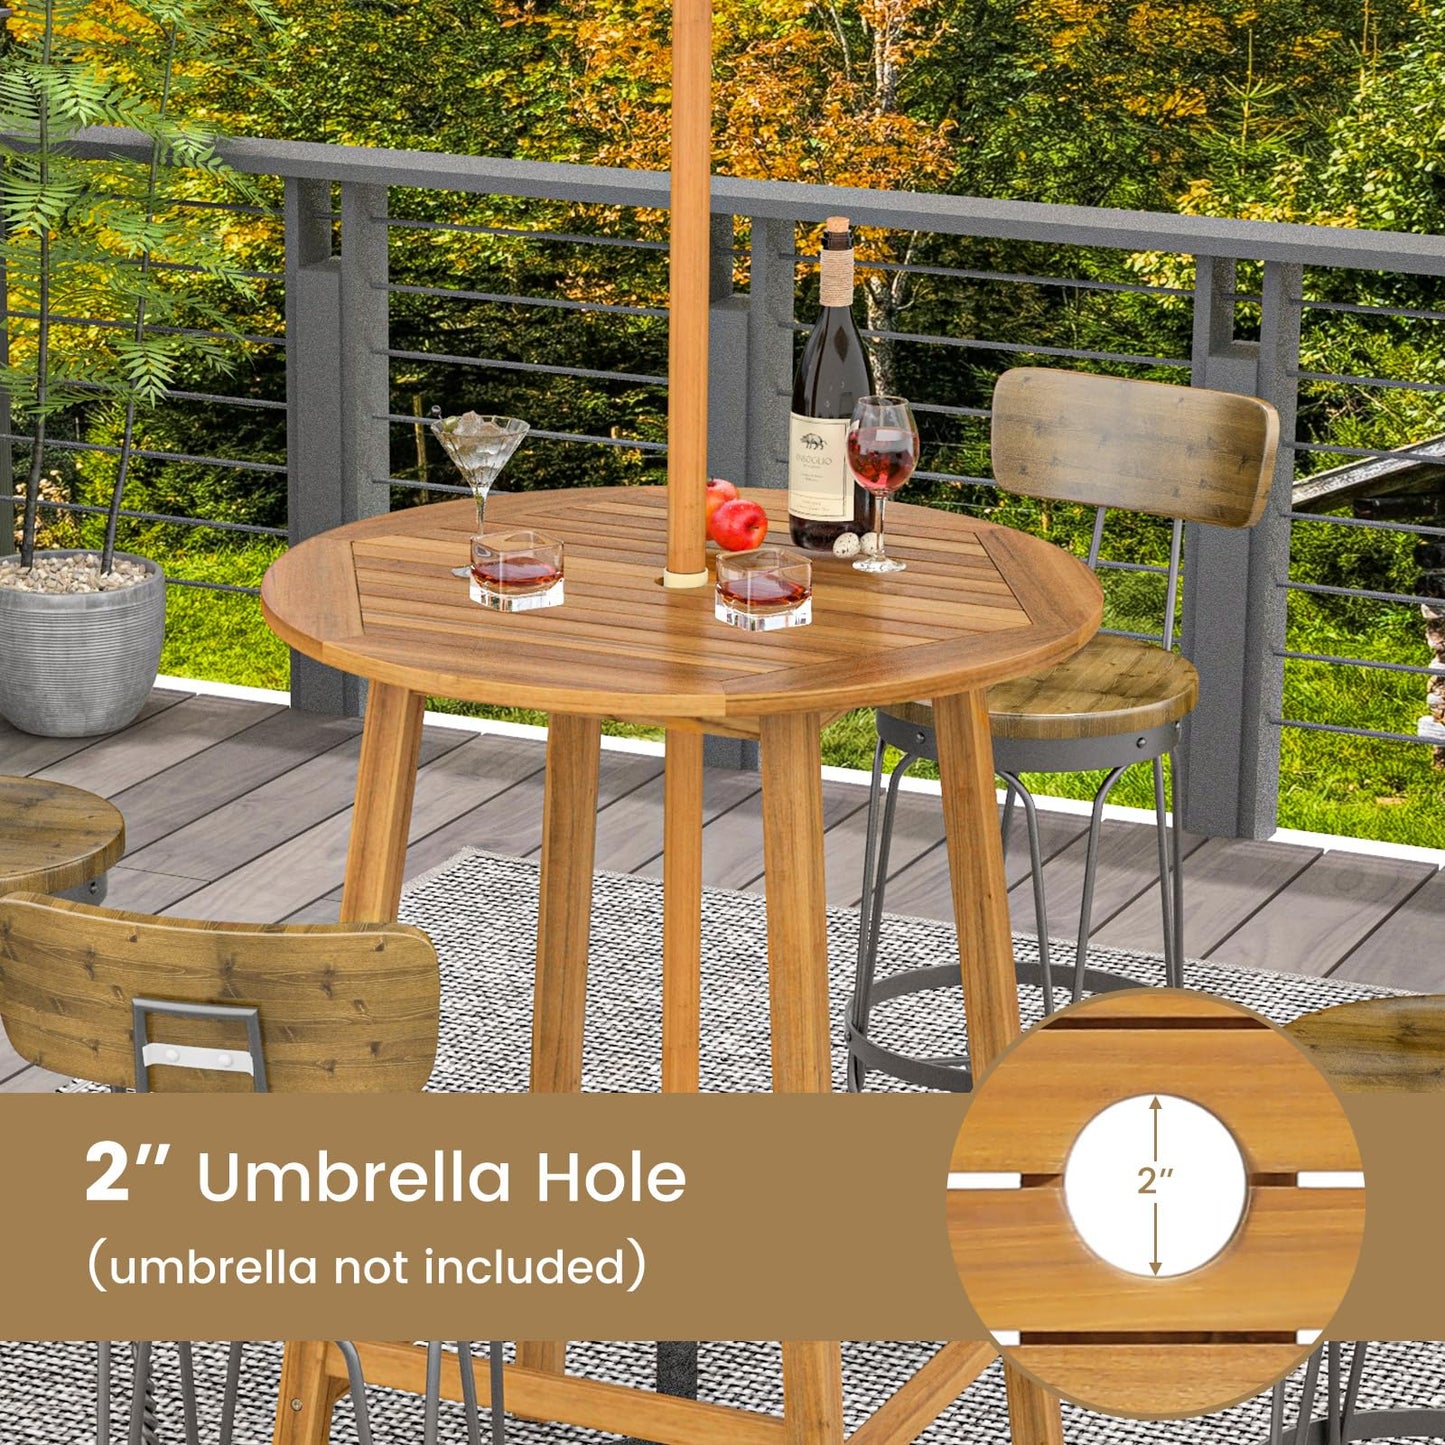 Tangkula 31.5” Acacia Wood Patio Bar Table, Round Bistro Table with Umbrella Hole, Outdoor Dining Table for Garden, Backyard, Poolside